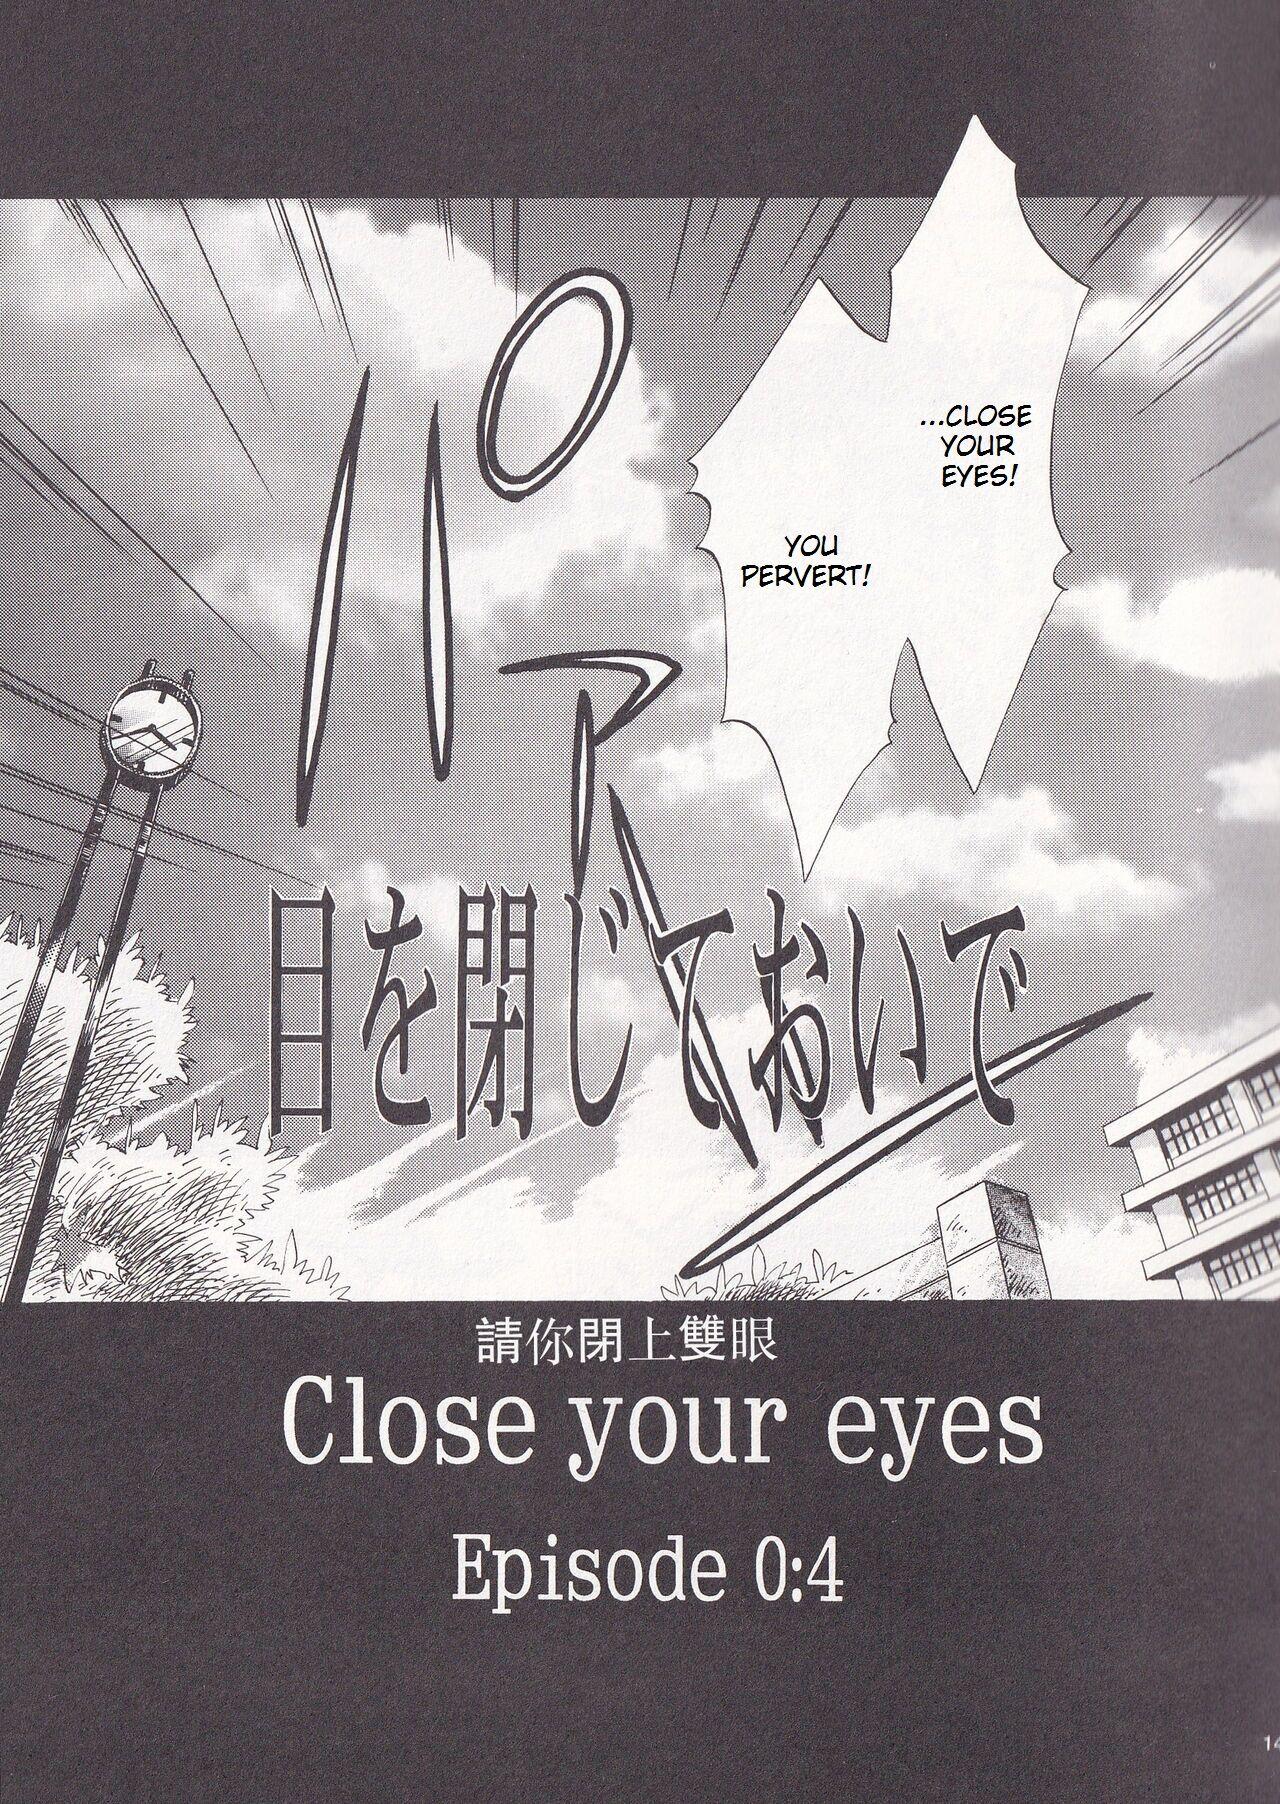 Close your eyes Episode 0:4 8